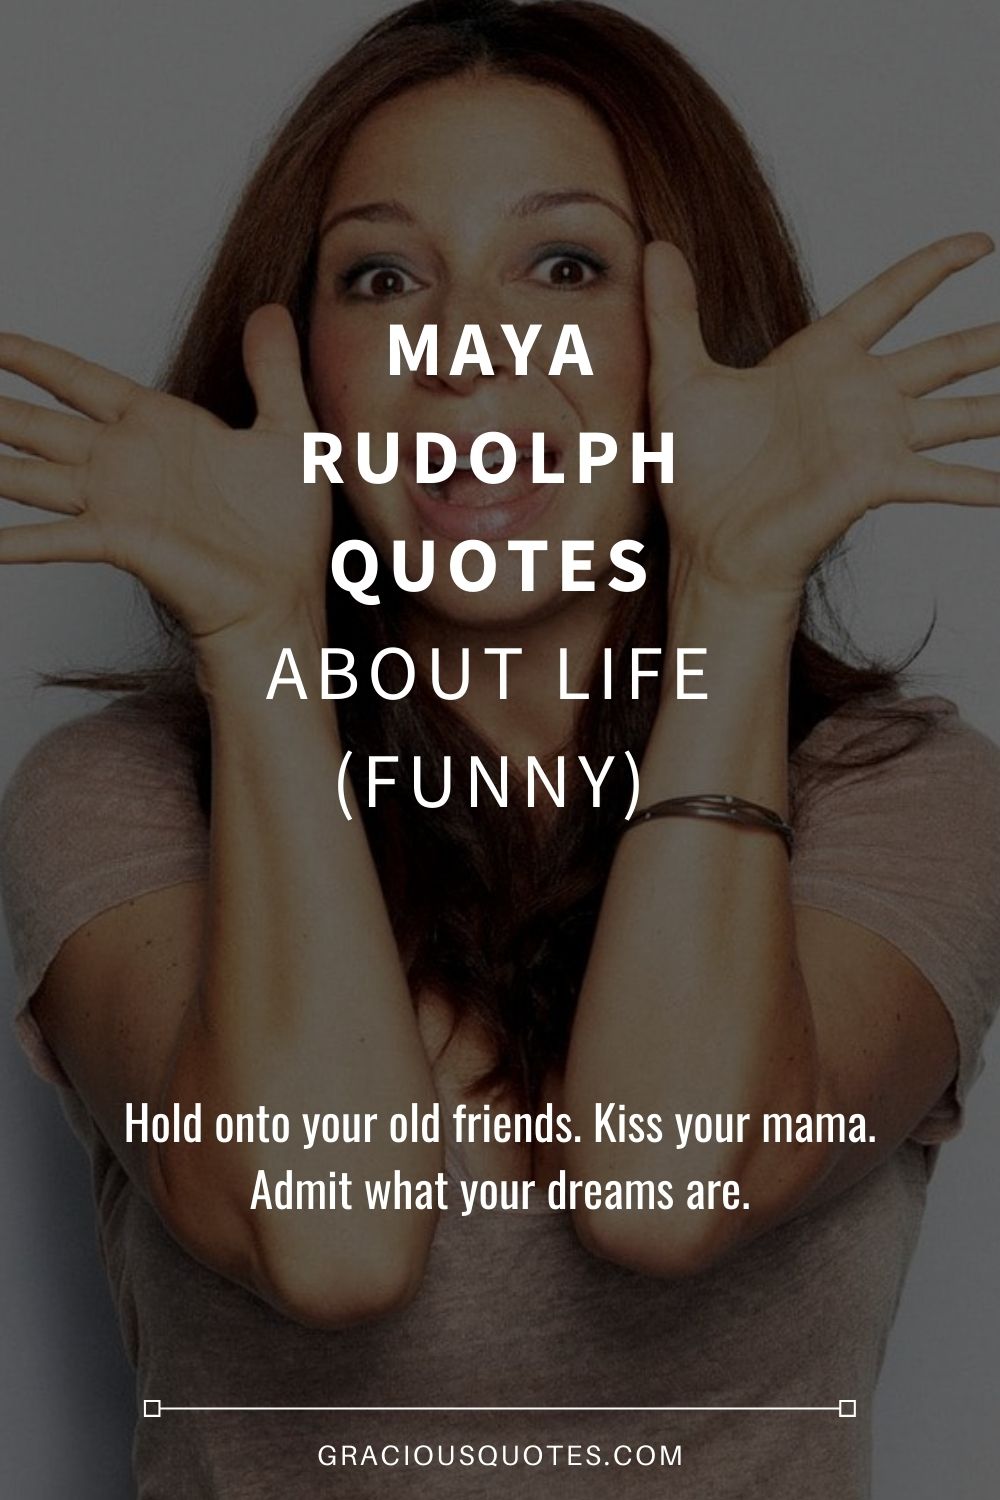 Maya Rudolph Quotes About Life (FUNNY) - Gracious Quotes